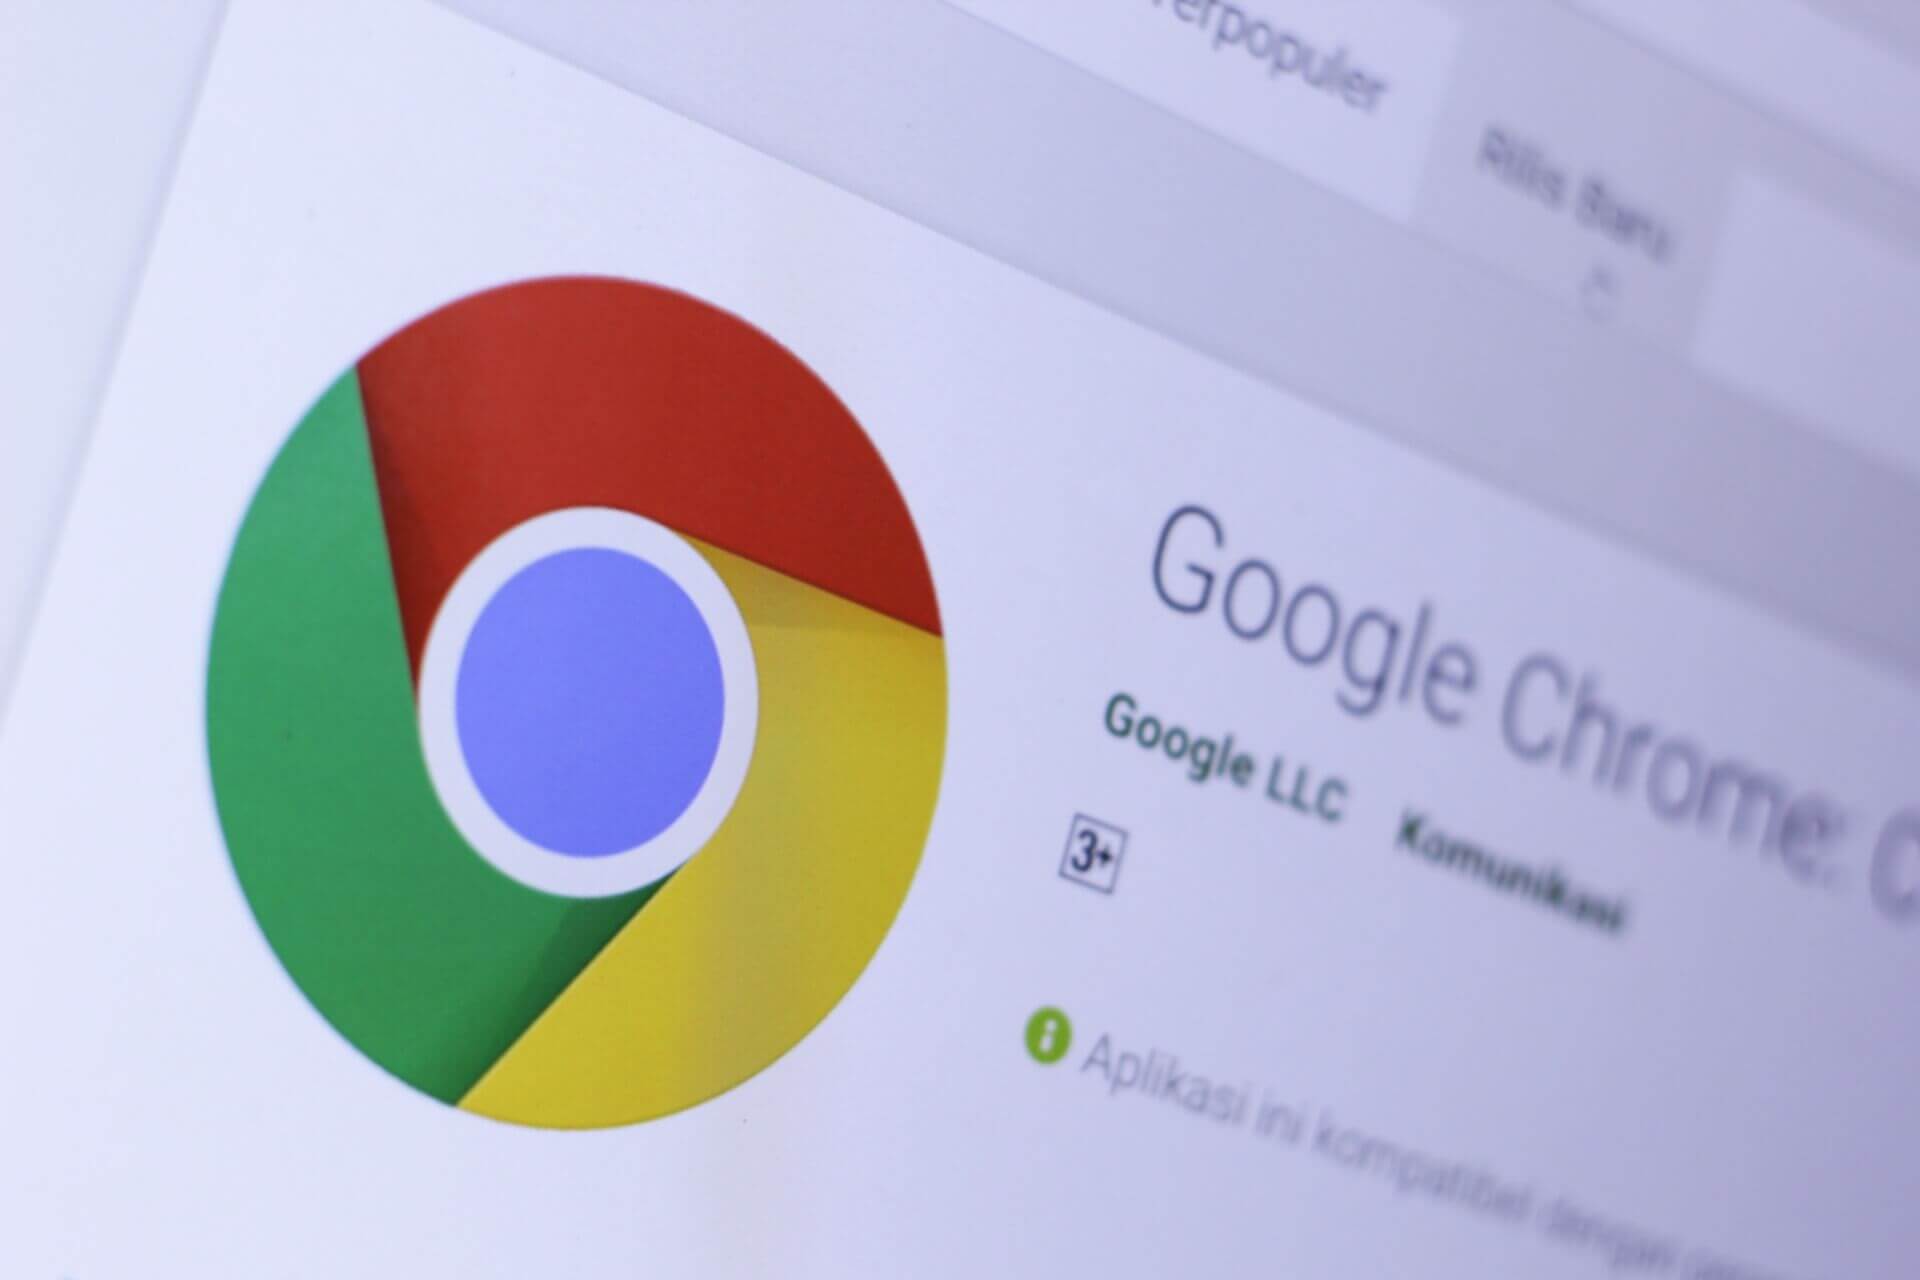 how to fix This file is dangerous so Chrome has blocked it